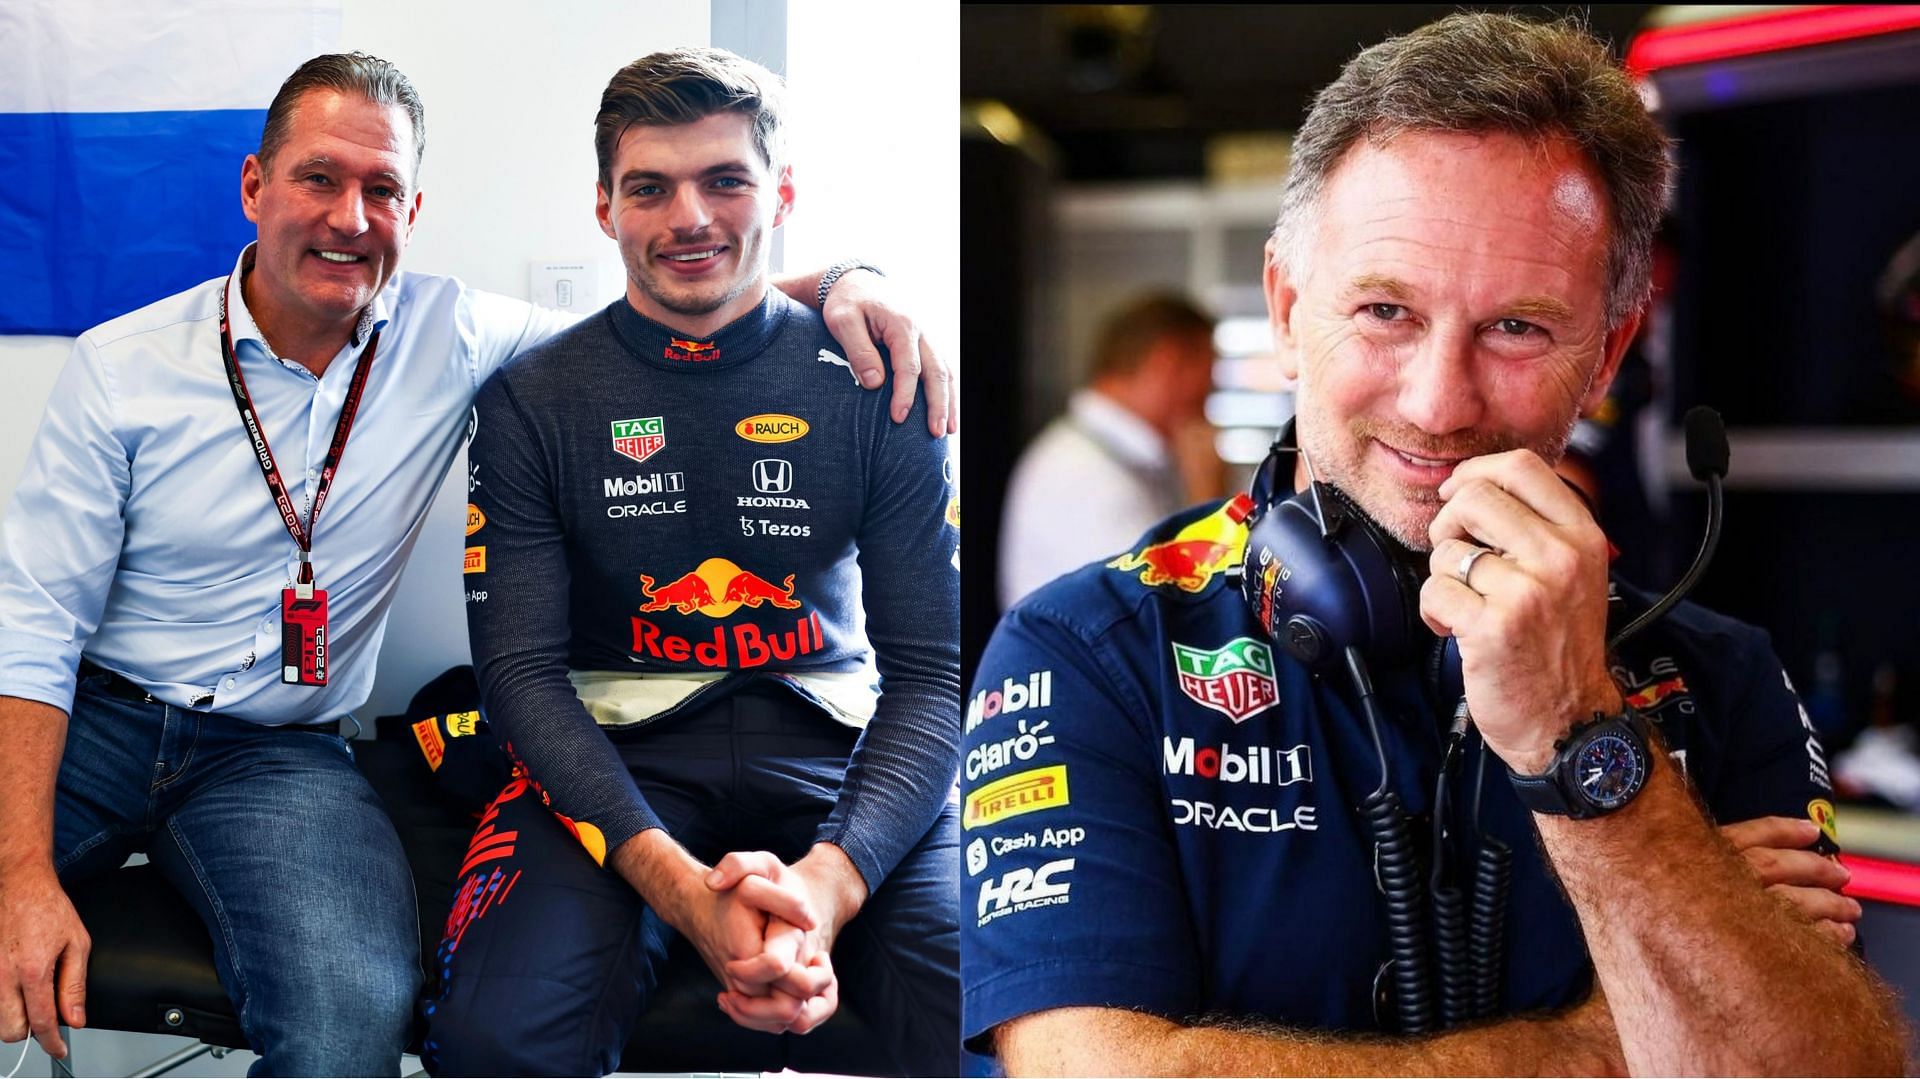 Max Verstappen with father Jos Verstappen on the left and Red Bull team principal Christian Horner (Image from Instagram)